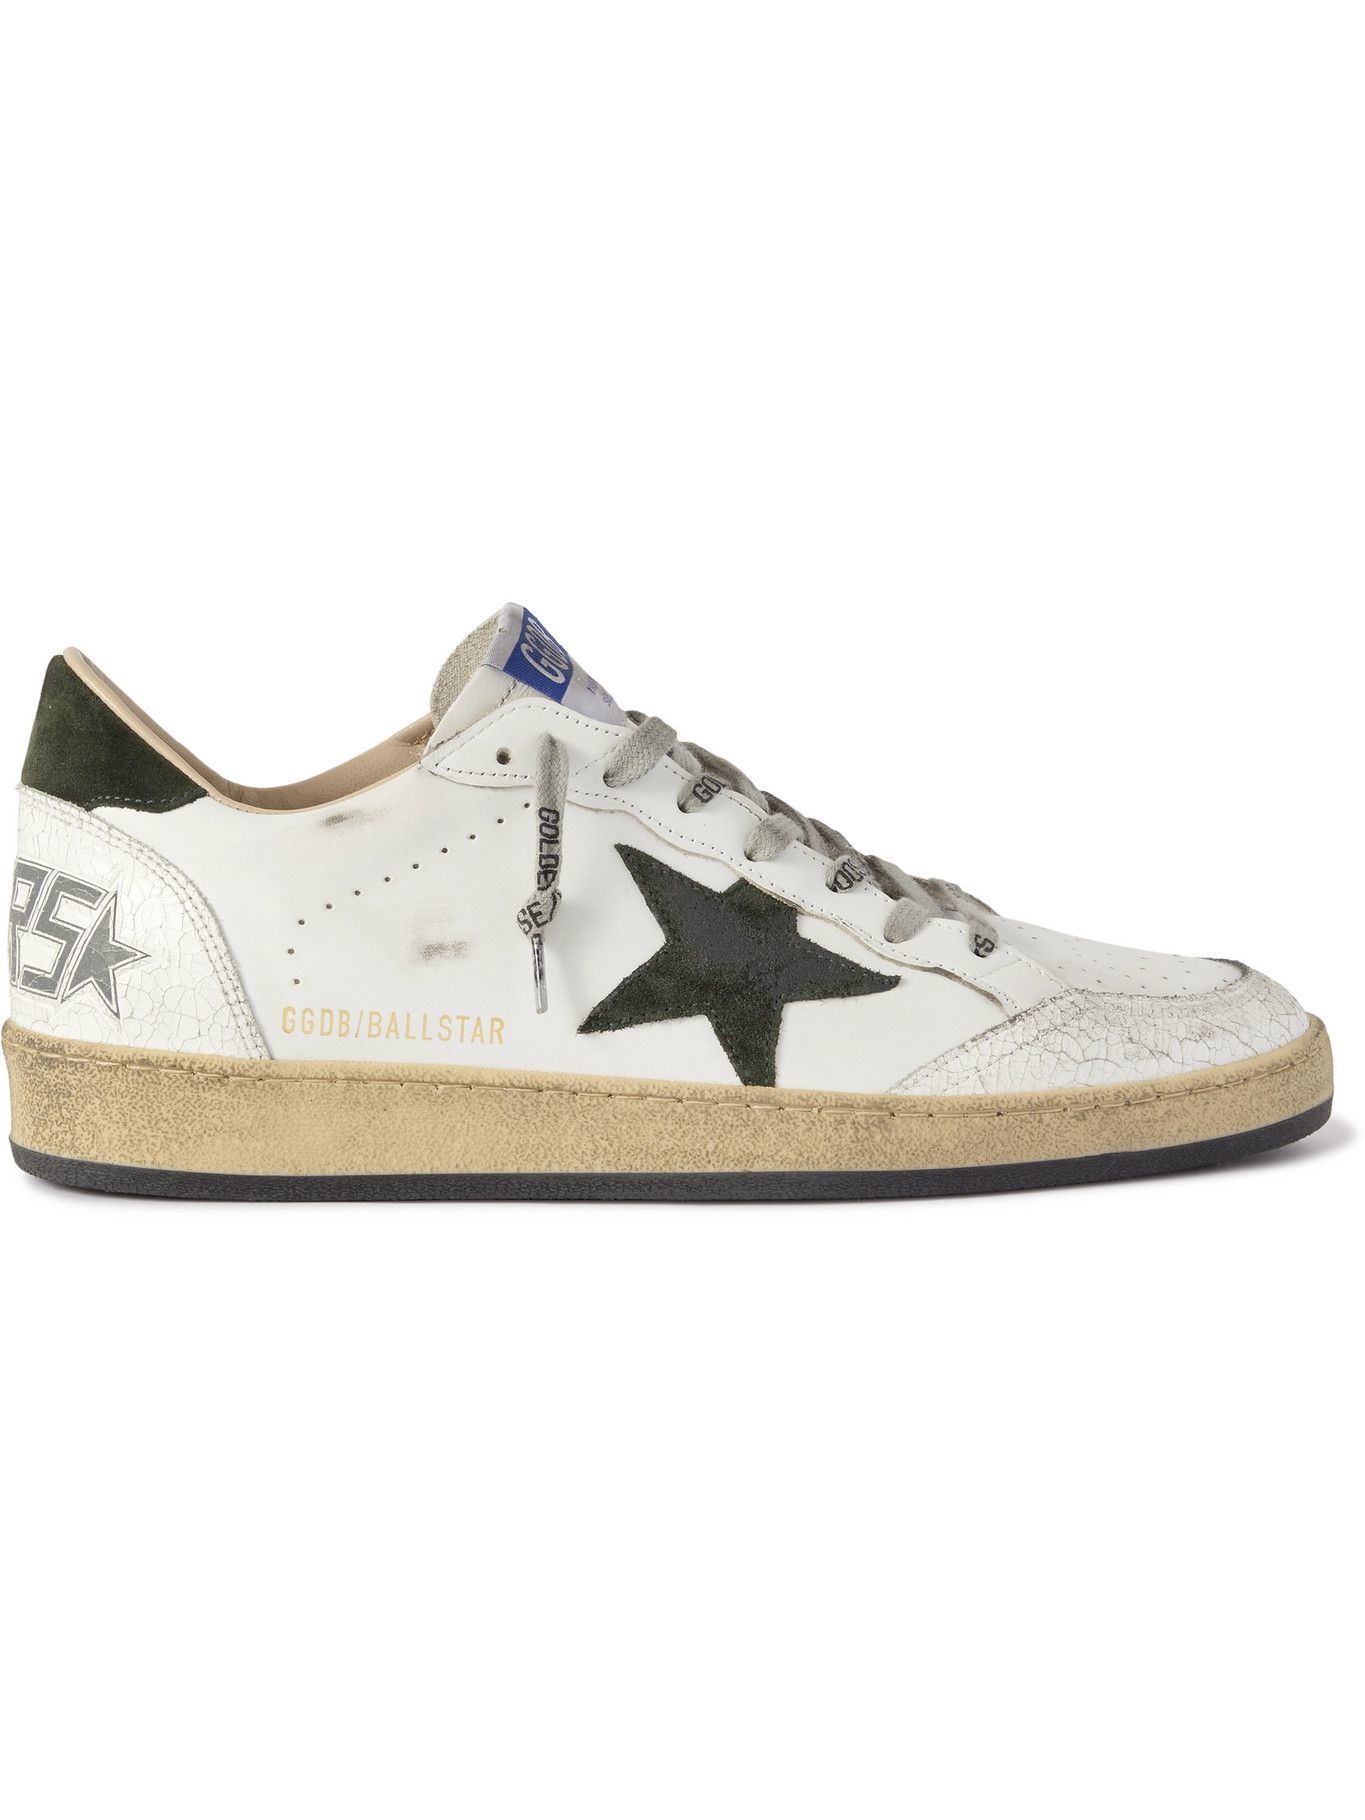 Golden Goose - Ballstar Distressed Leather and Suede Sneakers - White ...